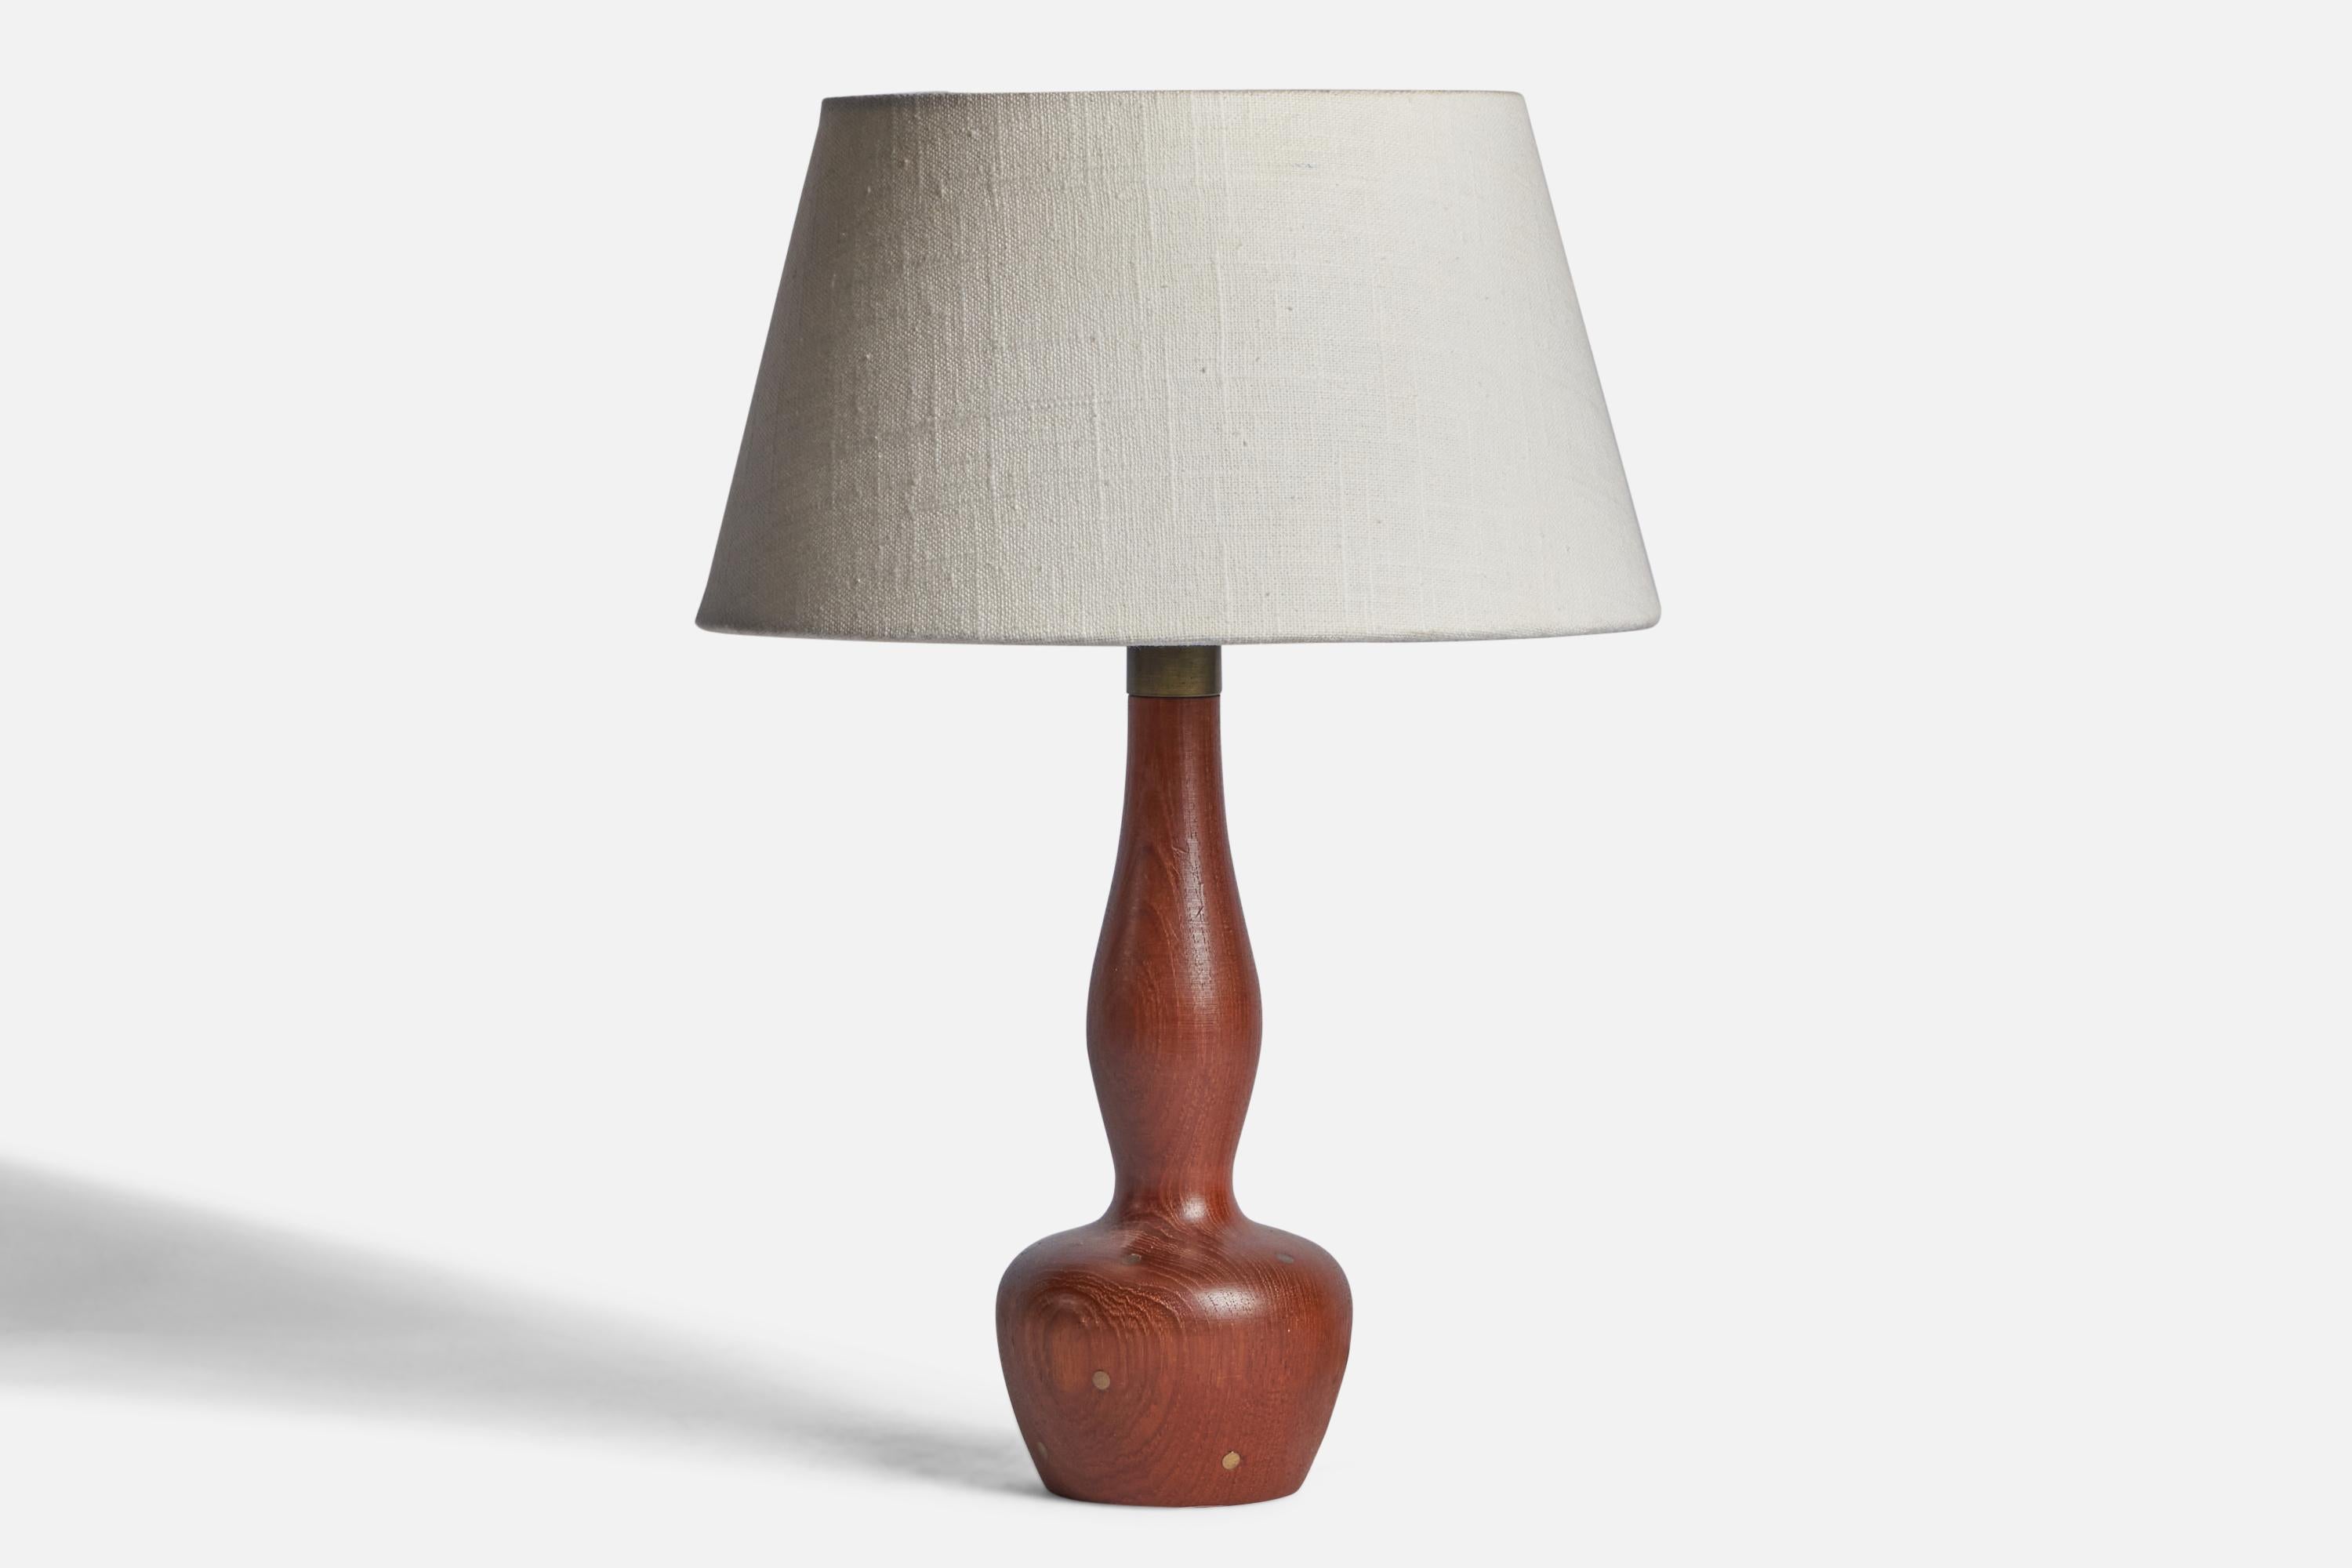 A teak table lamp with brass inlays designed and produced in Denmark, 1950s.

Dimensions of Lamp (inches): 11.55” H x 3.8” Diameter
Dimensions of Shade (inches): 7” Top Diameter x 10” Bottom Diameter x 5.5” H 
Dimensions of Lamp with Shade (inches):